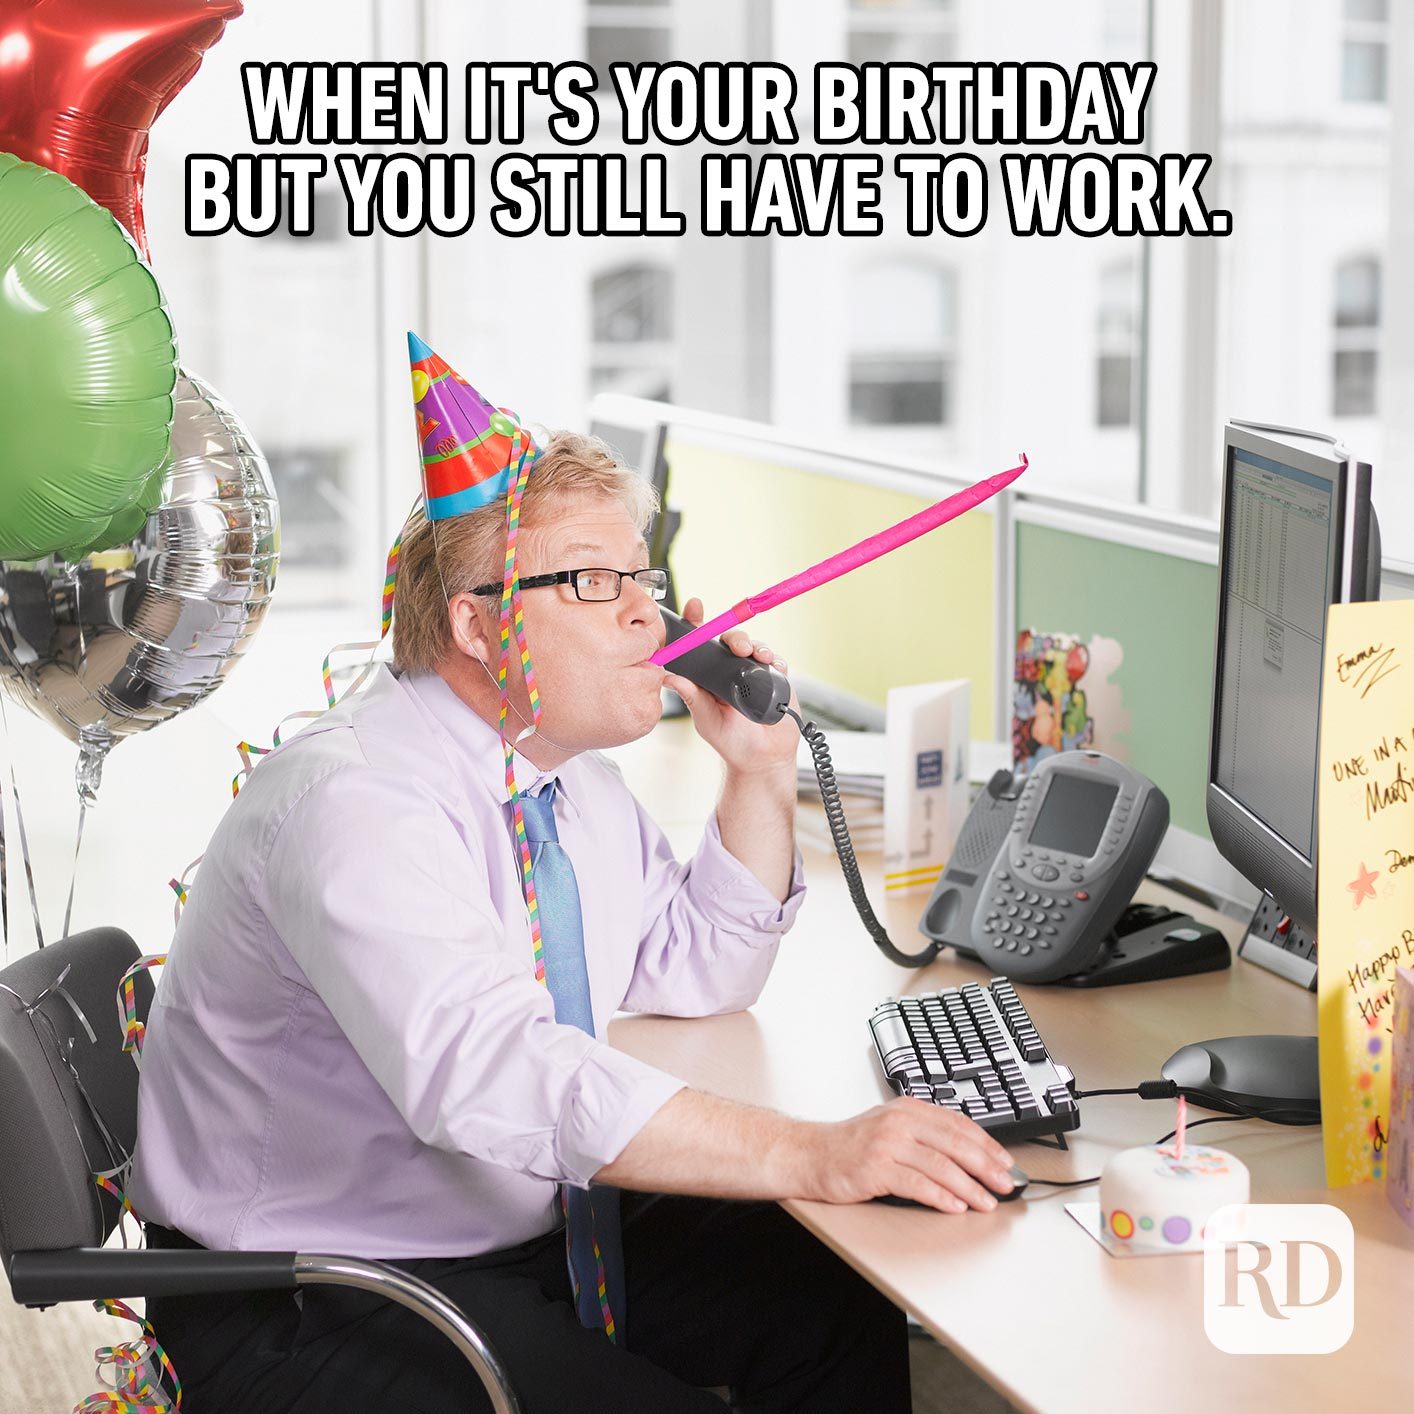 funny happy birthday memes for coworkers Coworker birthdays bummer ...